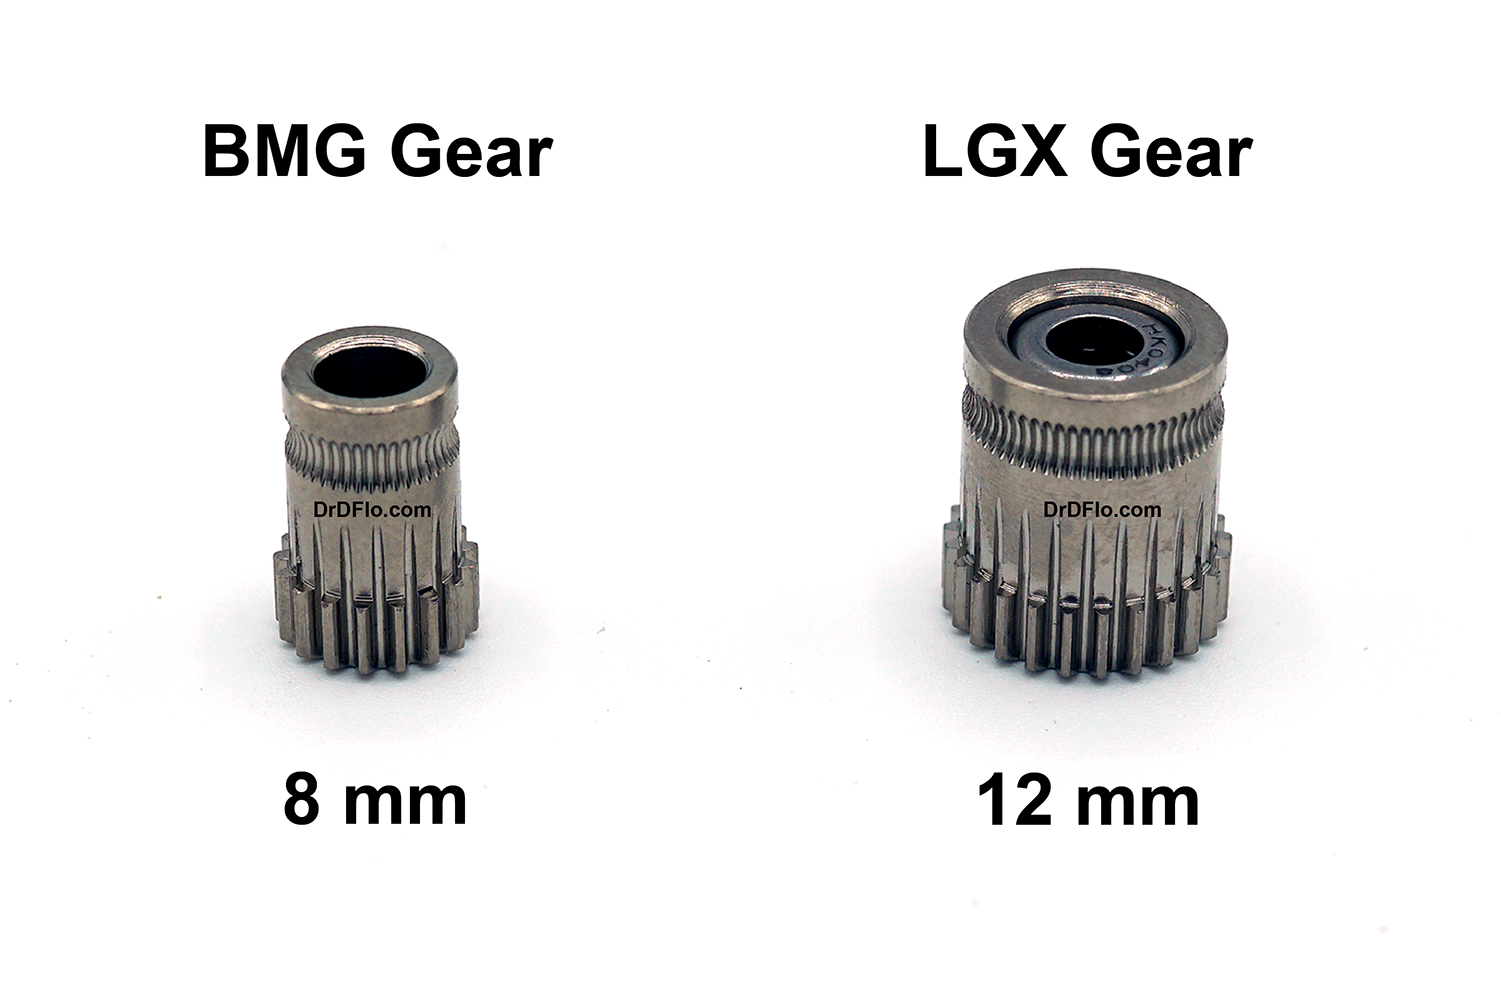 Close up of bondtech extrusion gears. The larger LGX gear versus the smaller BMG gear.